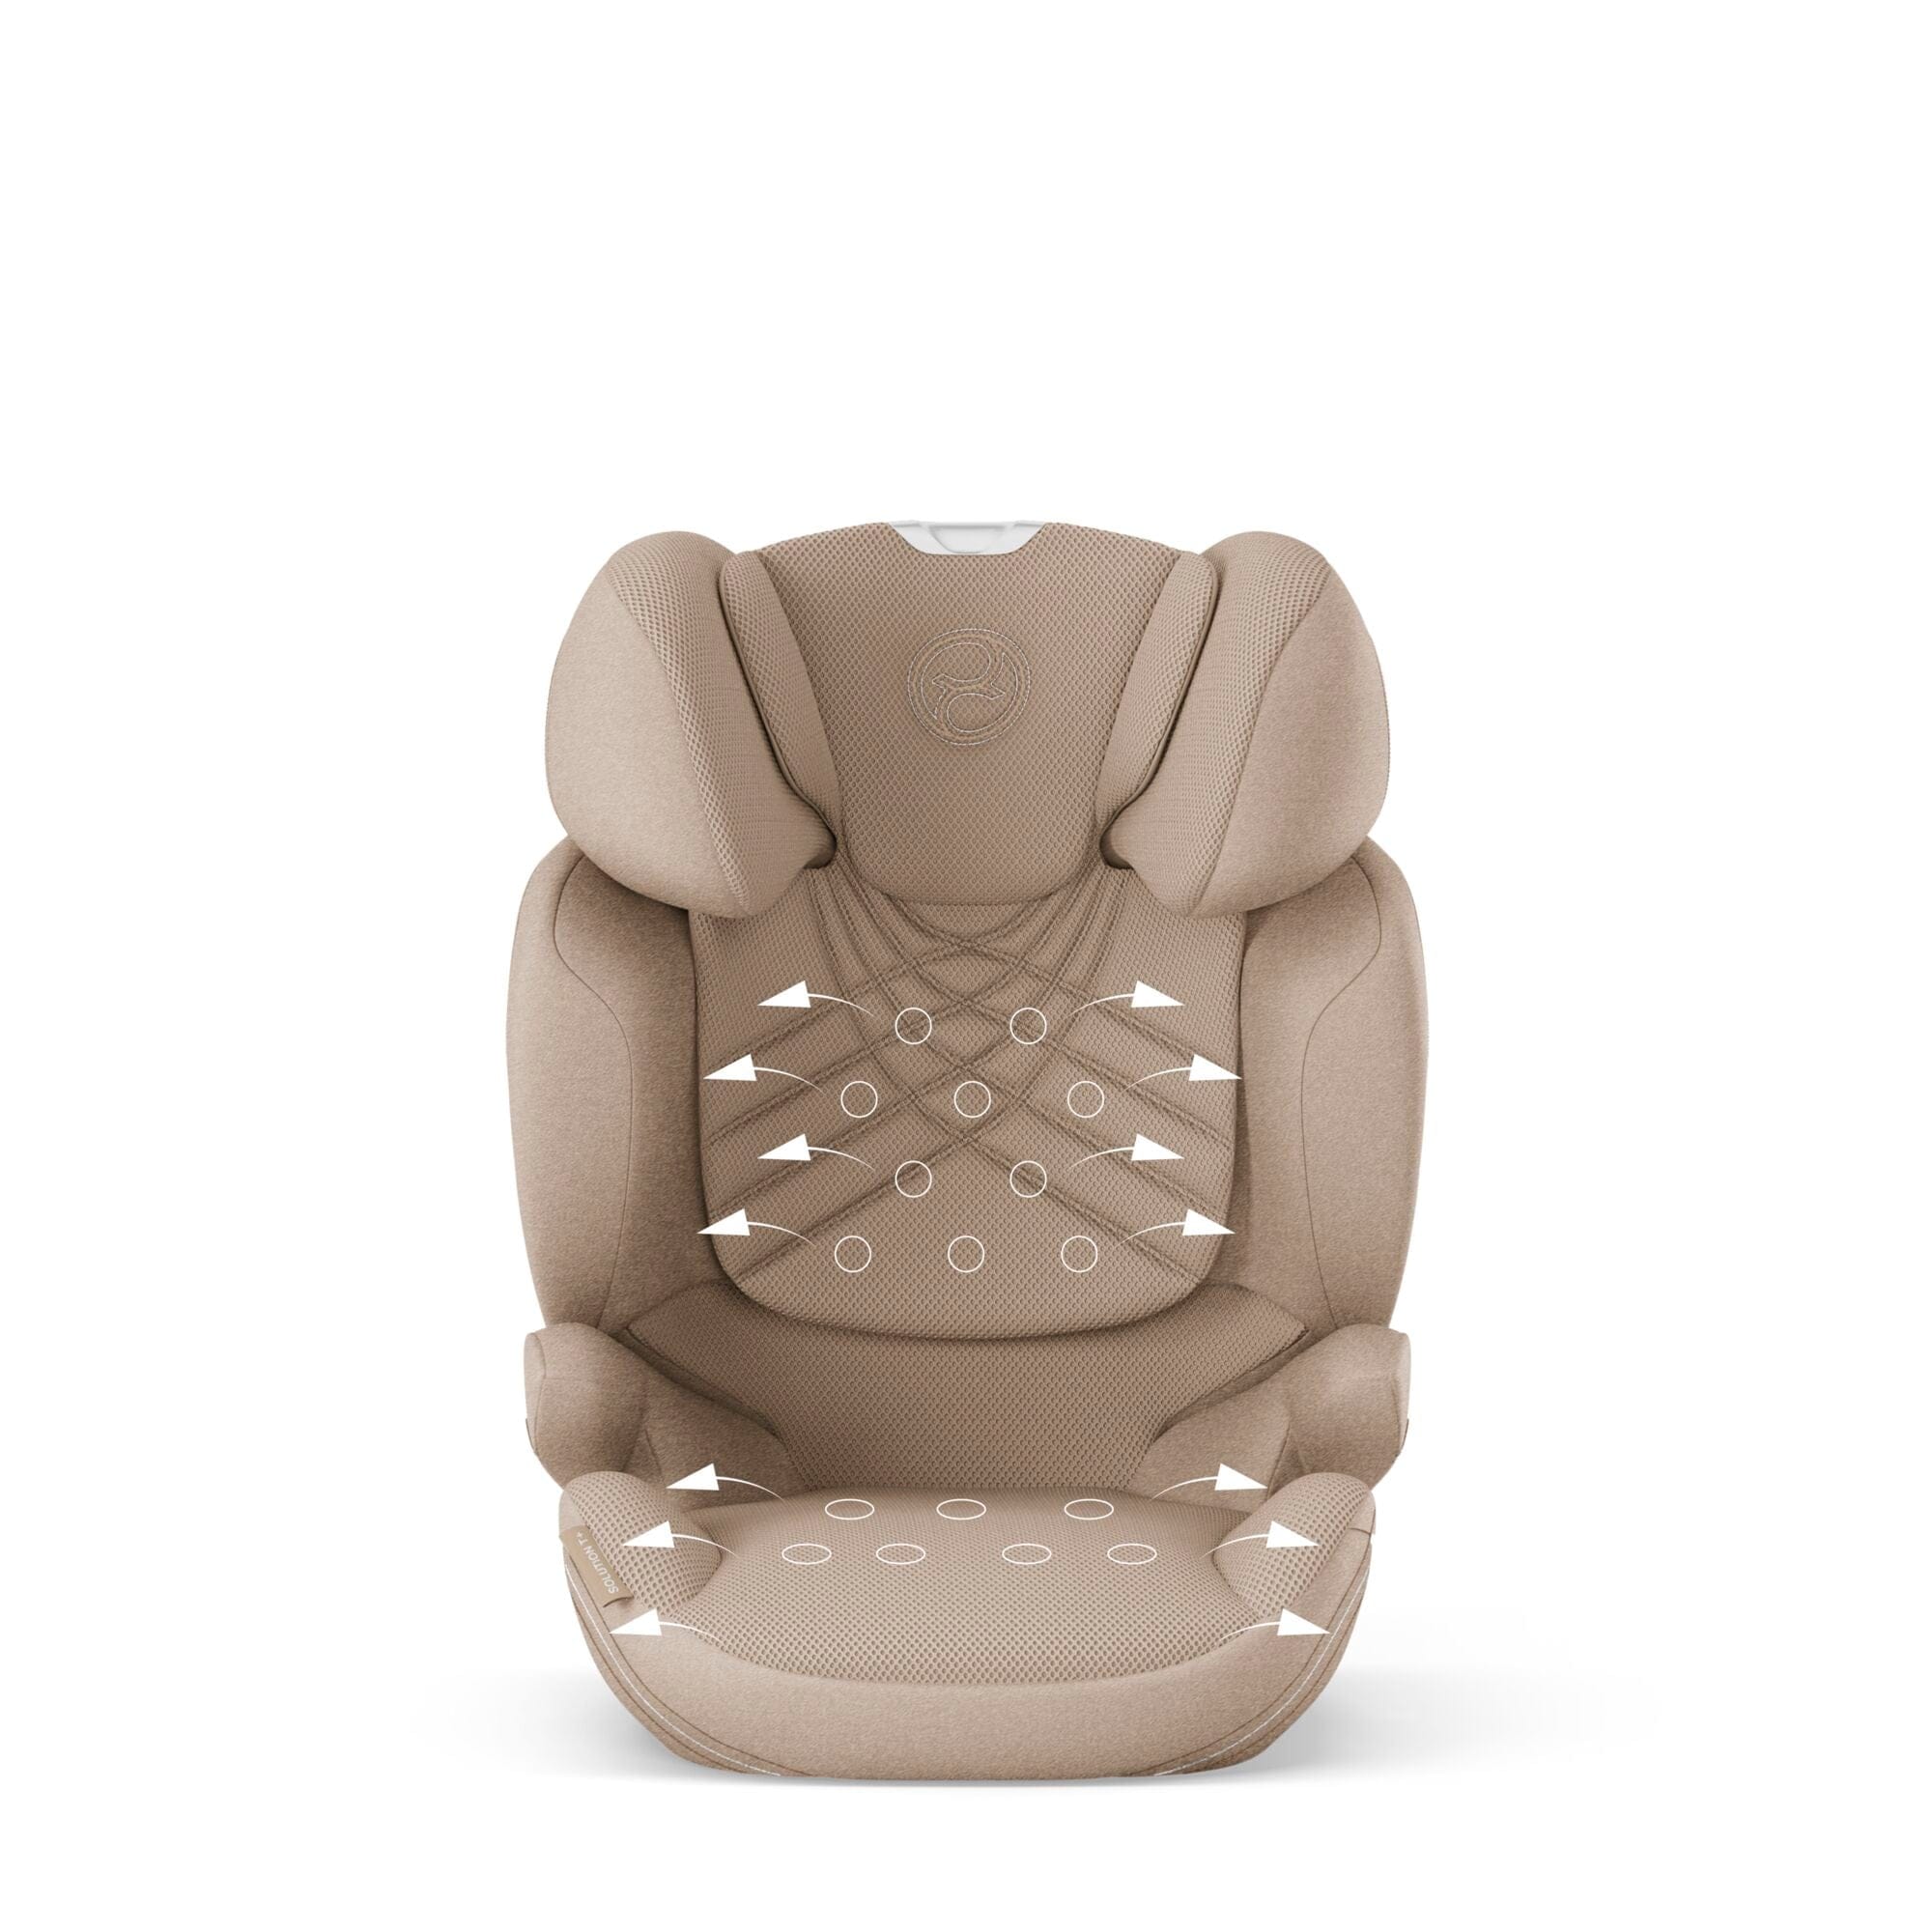 Cybex Solution T i-Fix Plus in Cosy Beige Highback Booster Seats 522004114 4063846380411